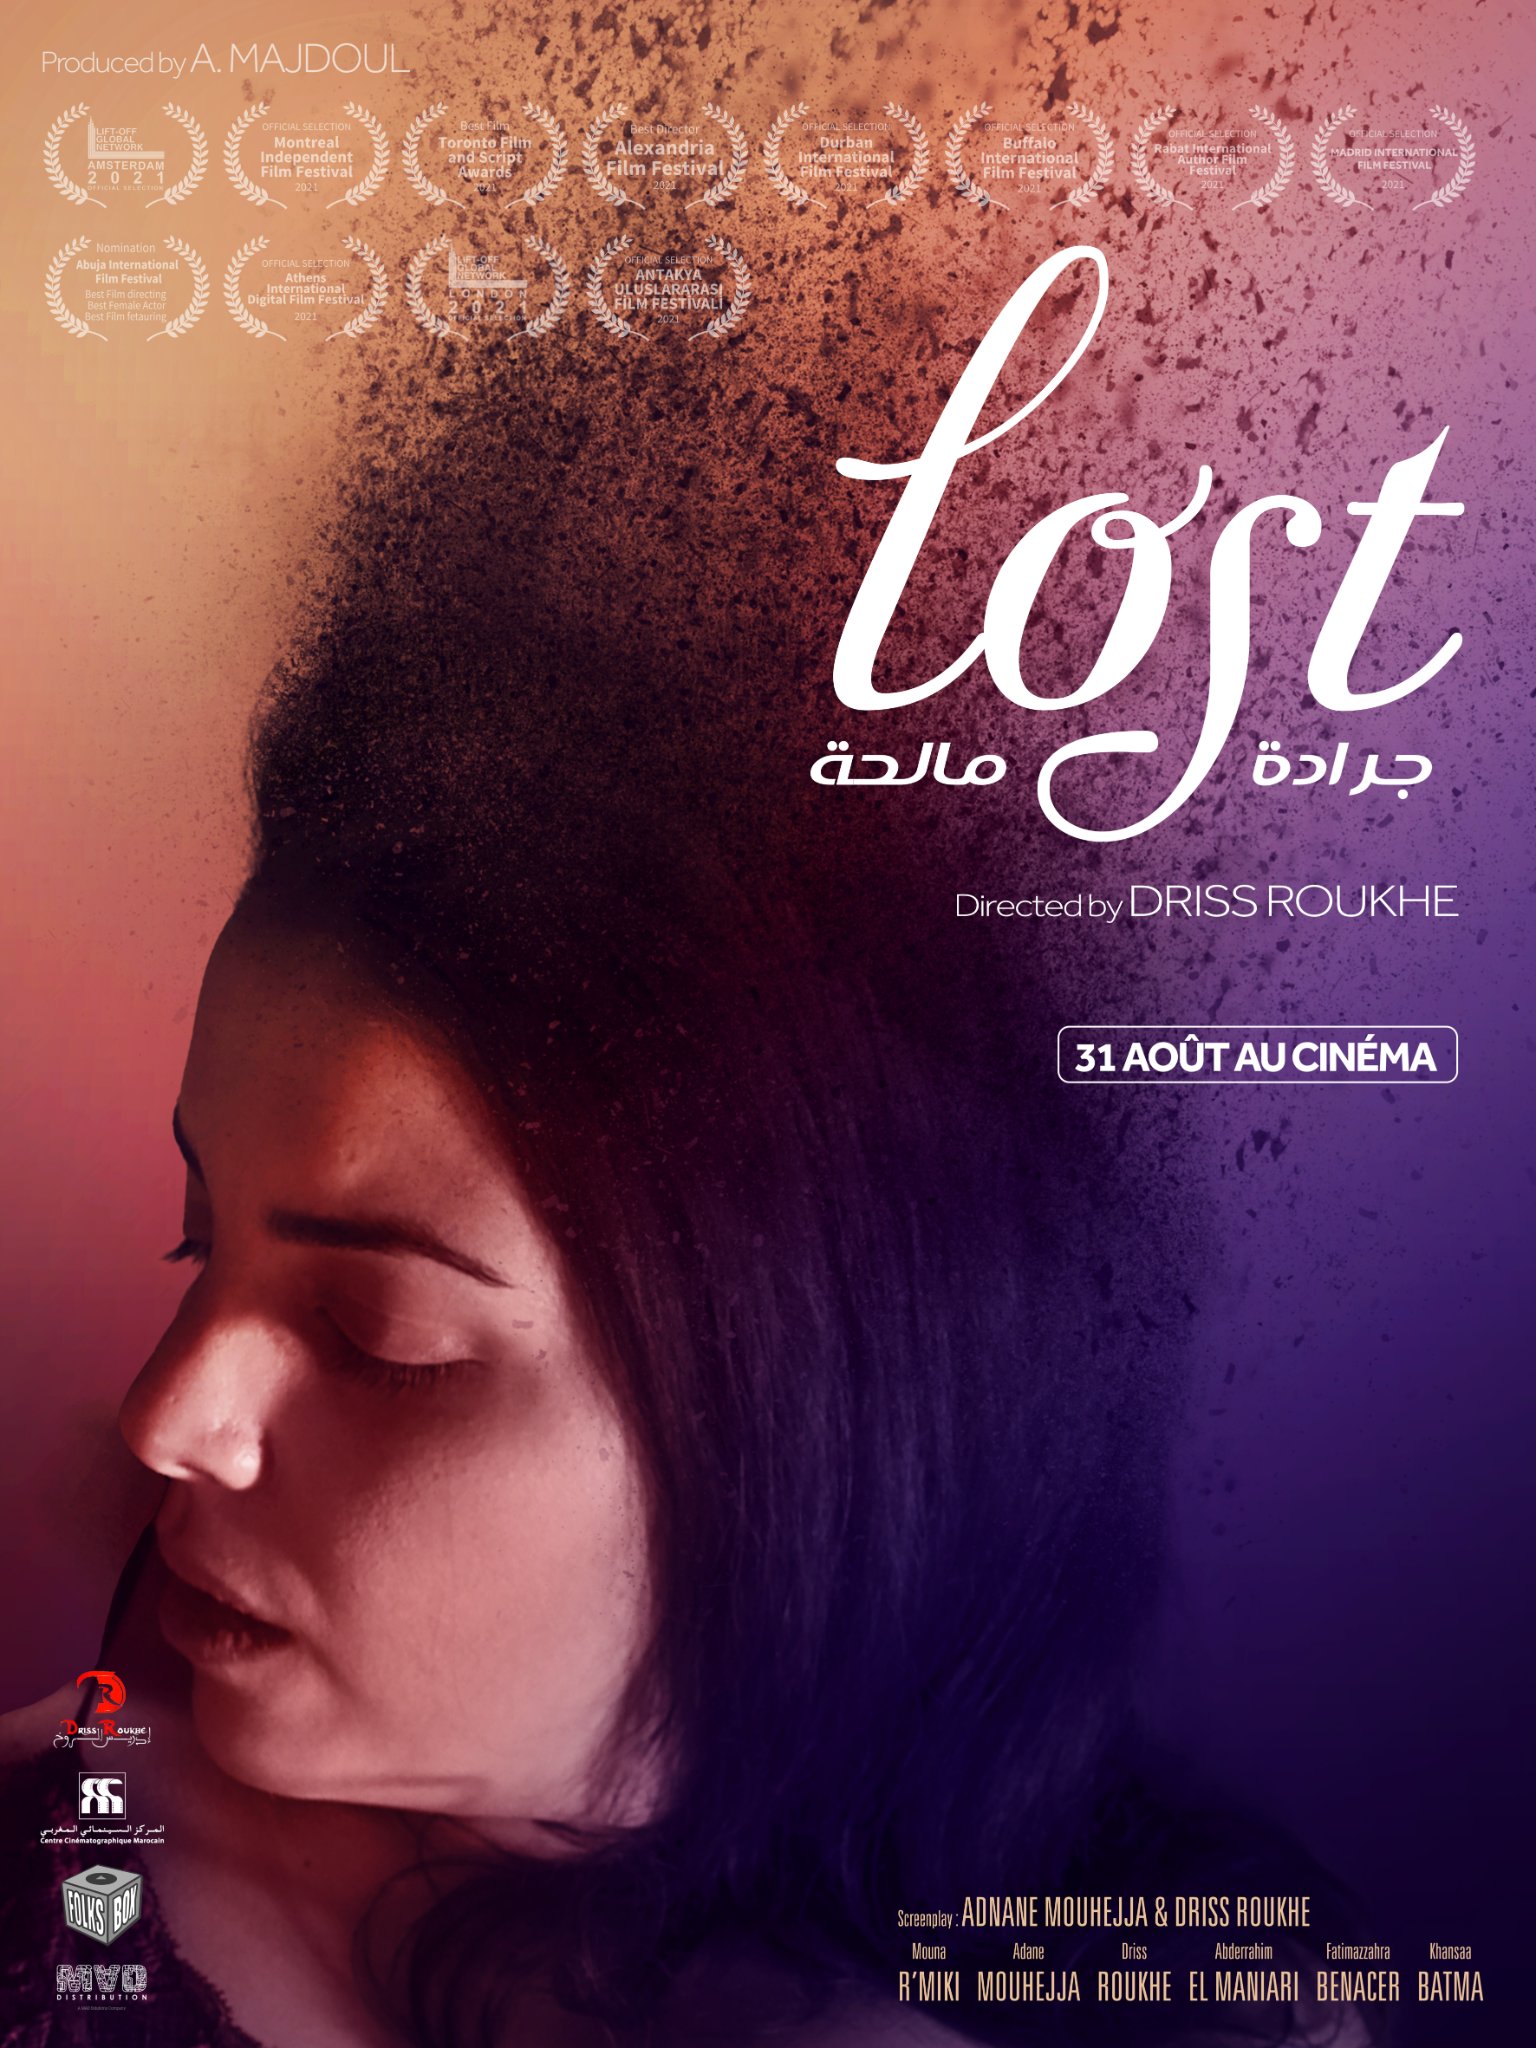 Starting form 31st August LOST will be released commercially at Moroccan theaters